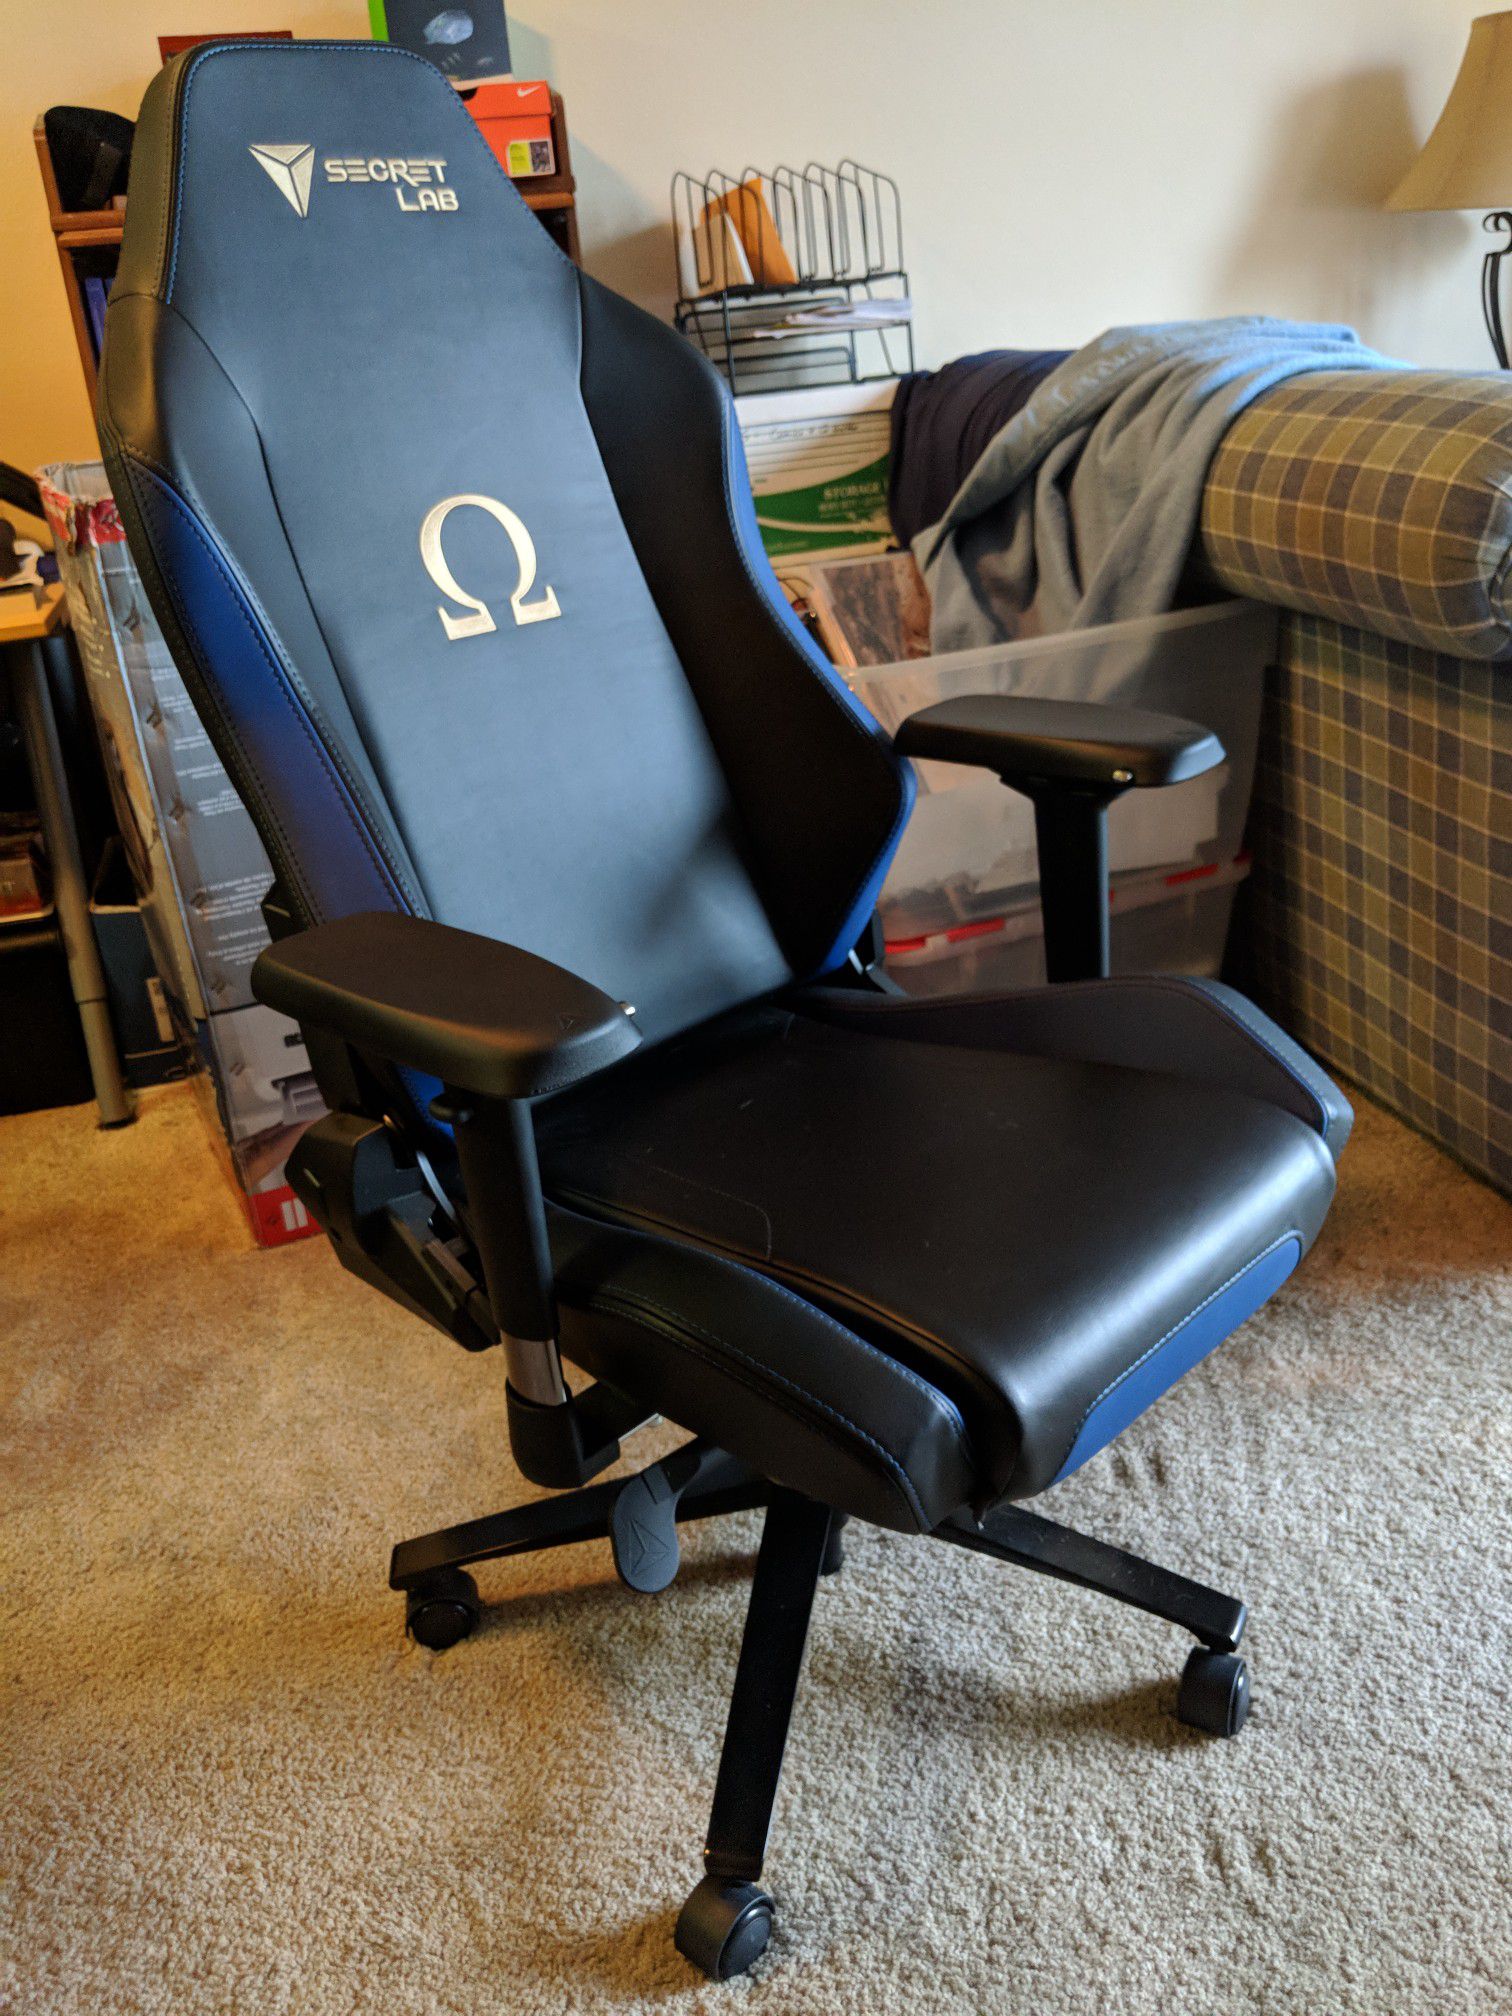 Secret lab Omega gaming/office chair